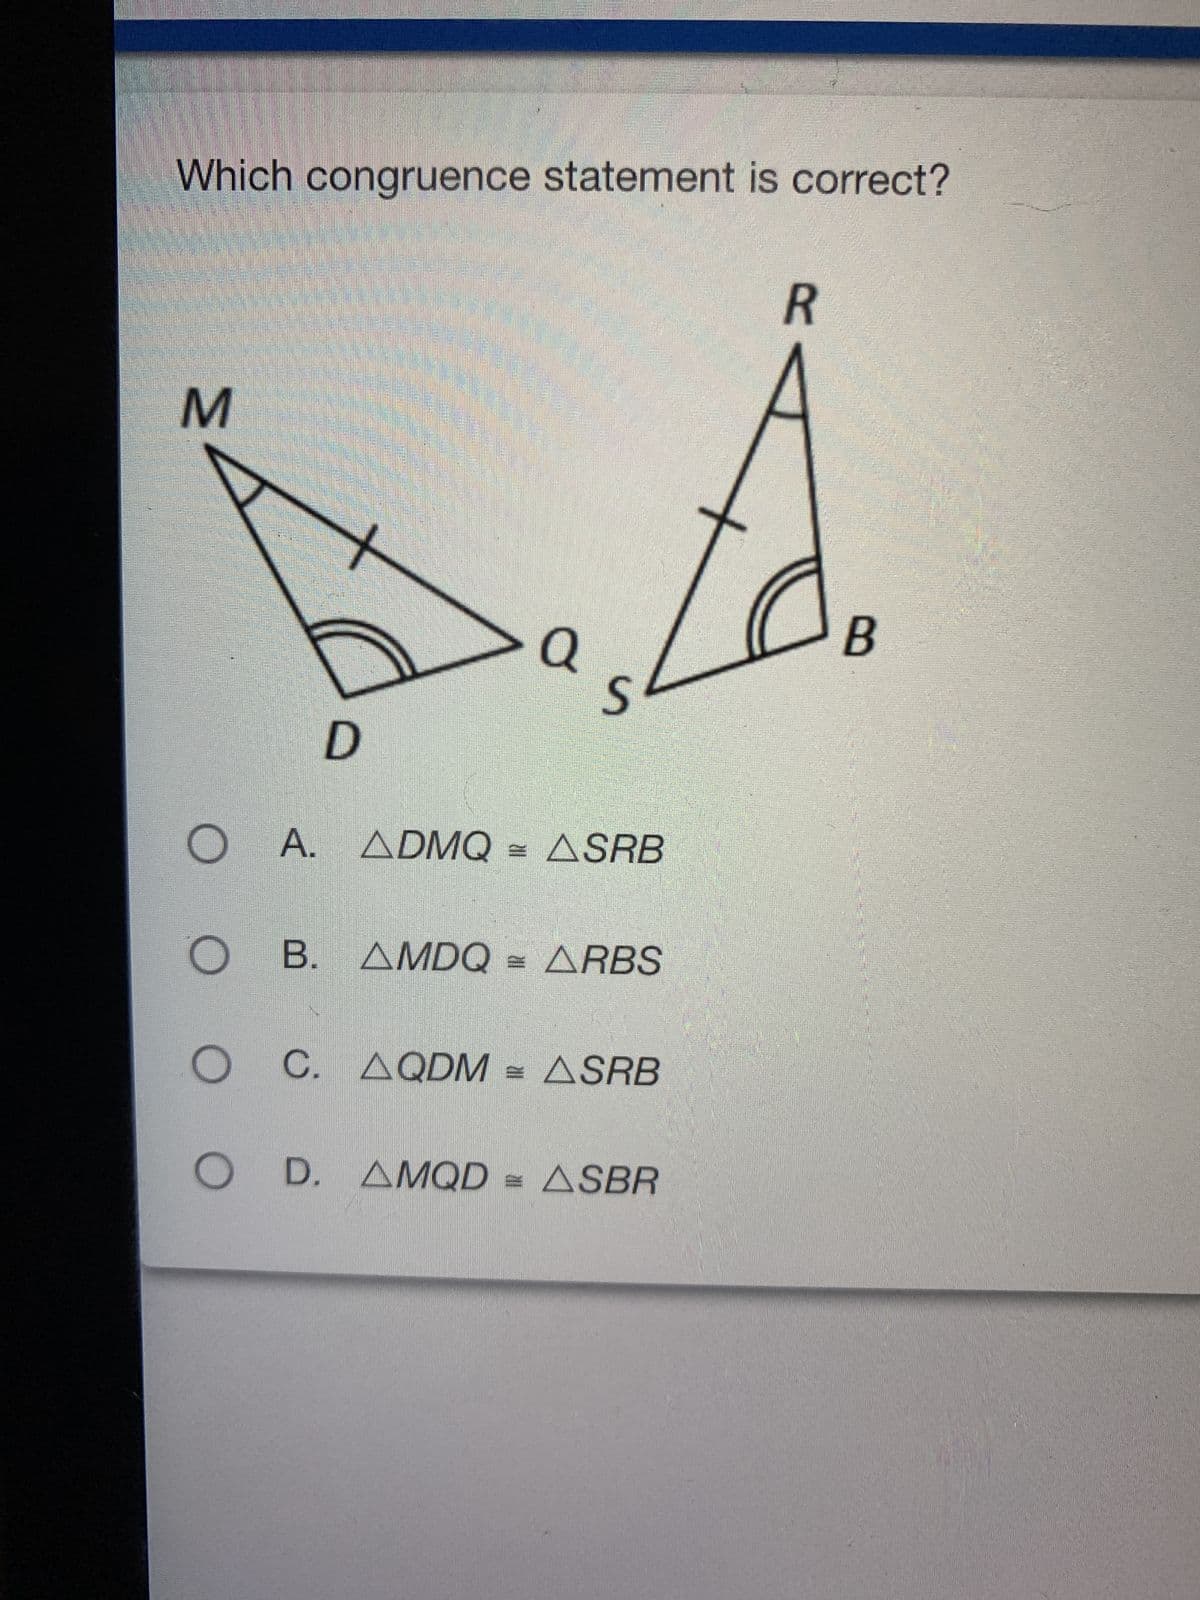 Which congruence statement is correct?
R
M
> a
S
D
O A. ADMQ = ASRB
OB. AMDQ = ARBS
O C.
C. AQDM = ASRB
OD.
D. AMQD = ASBR
B